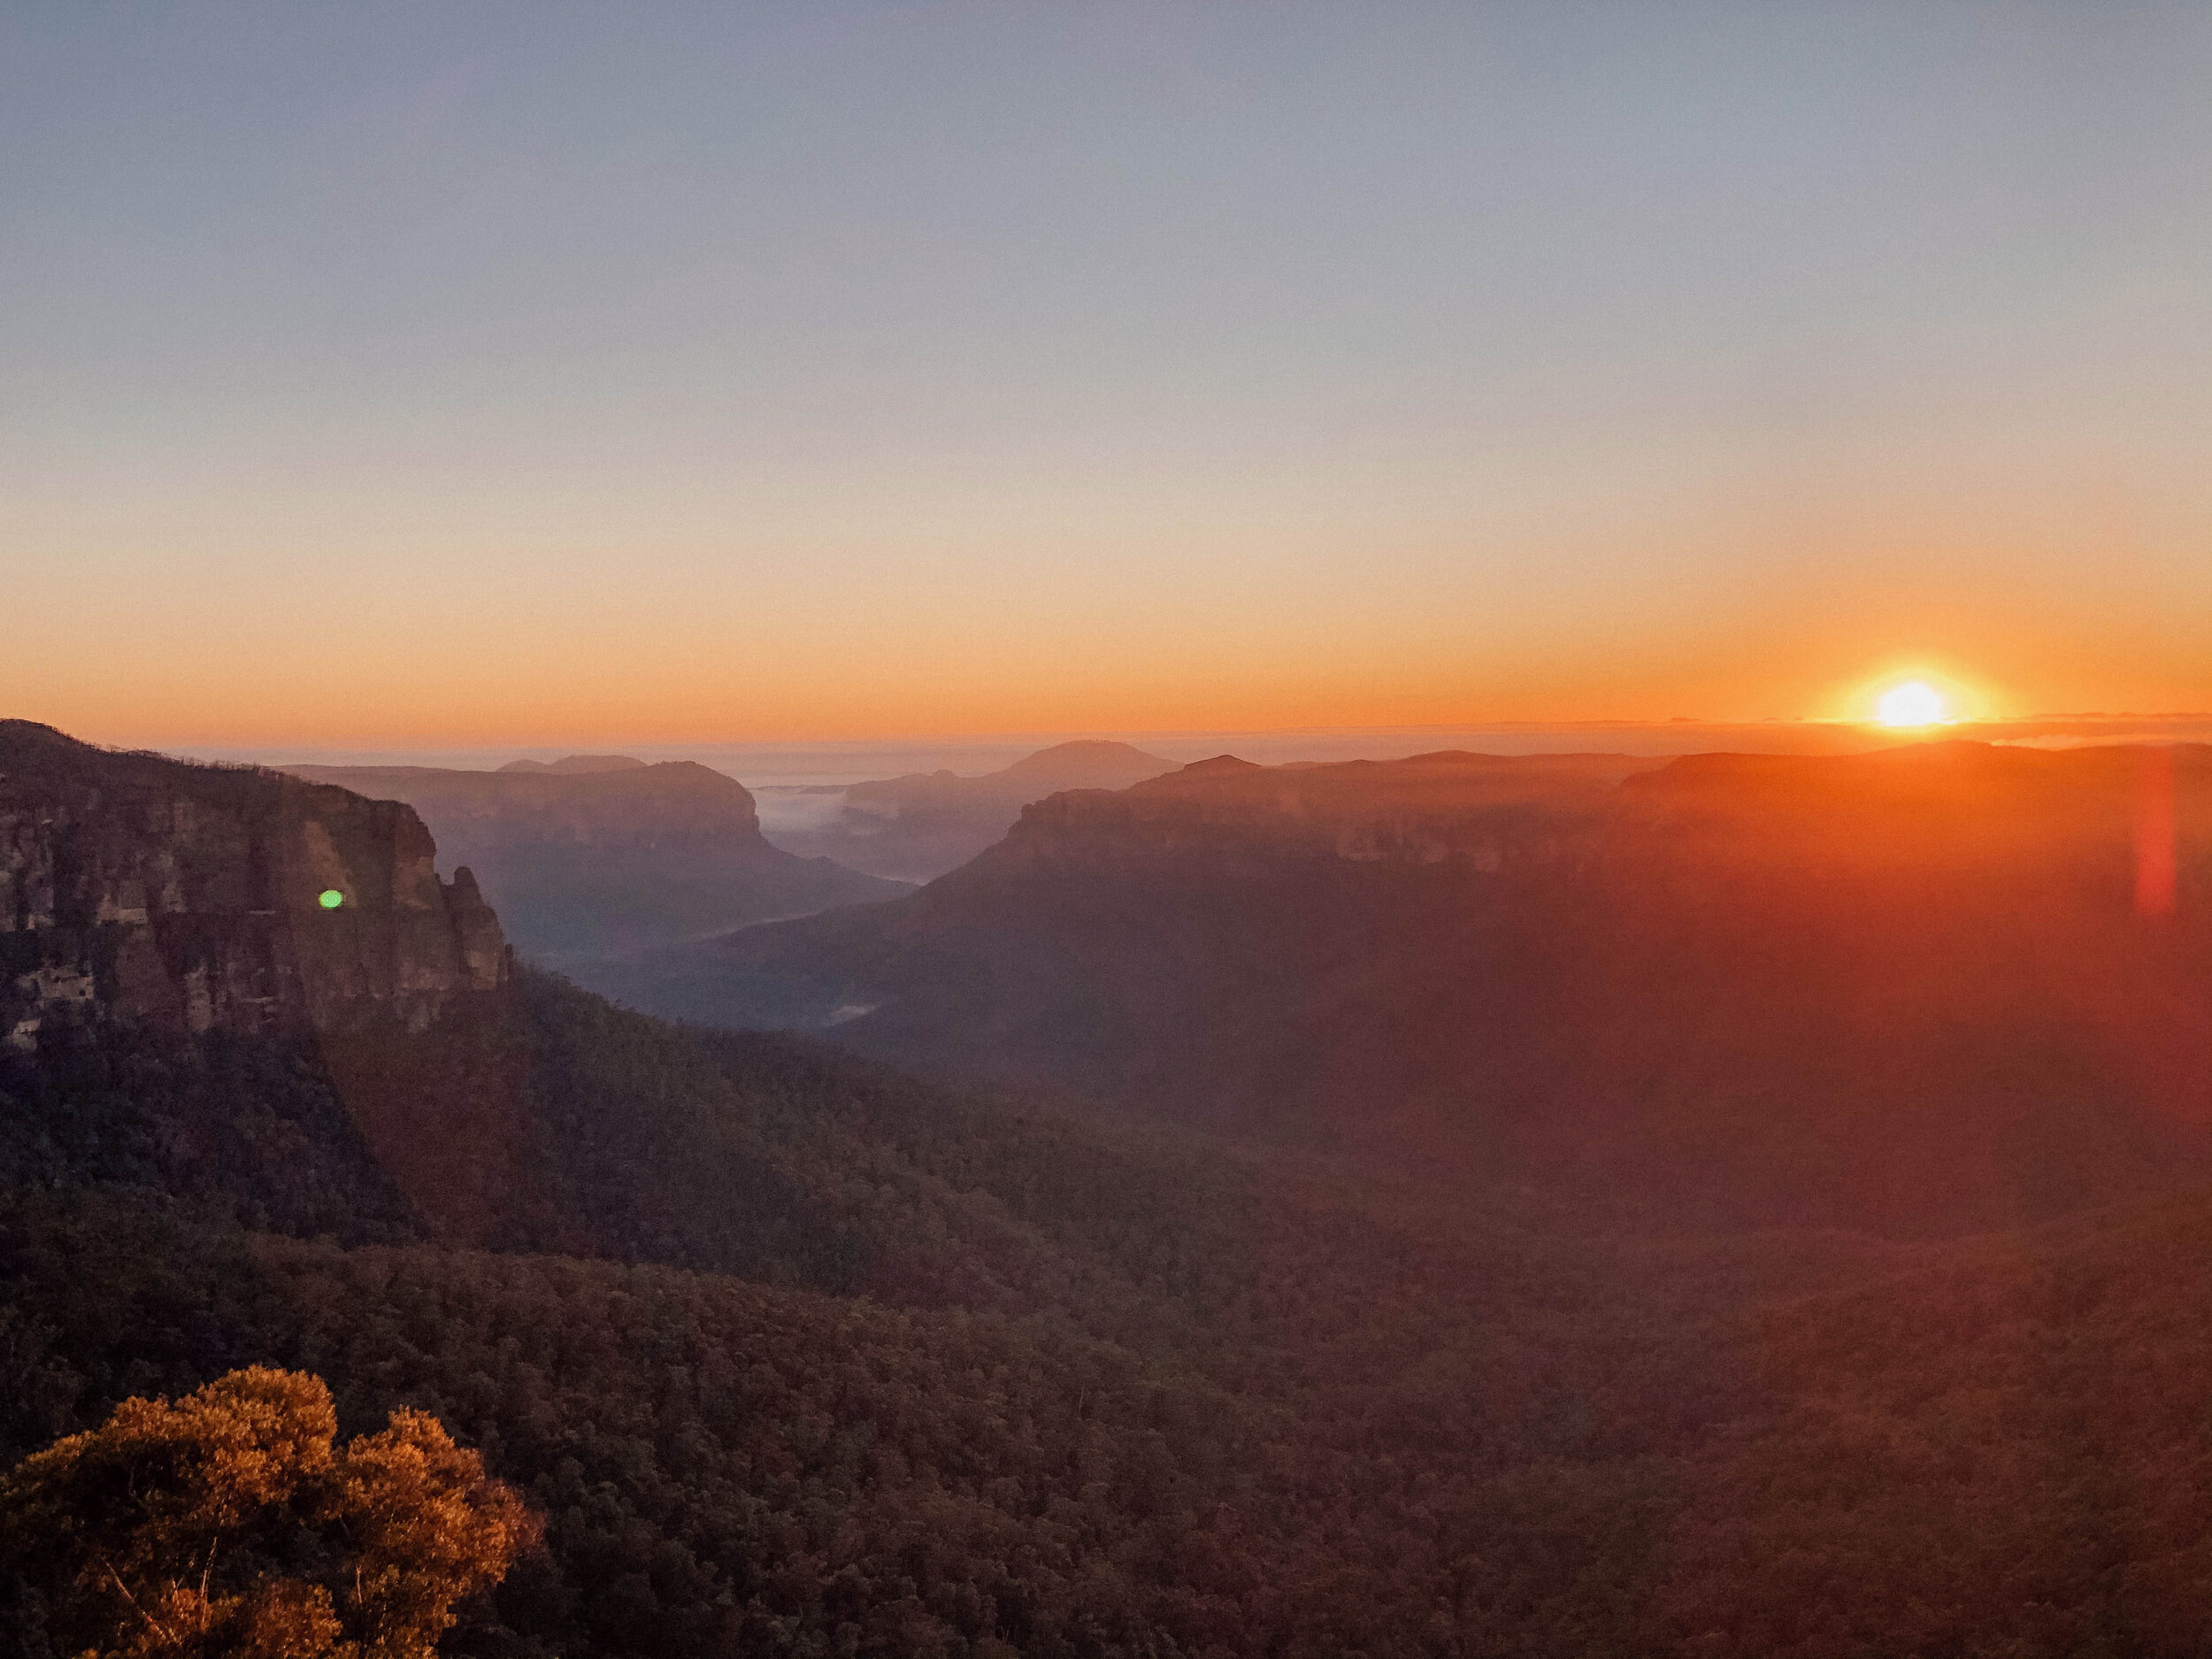 The sun rising behind the mountain in Blackheath - Blue Mountains - New South Wales (NSW) - Australia